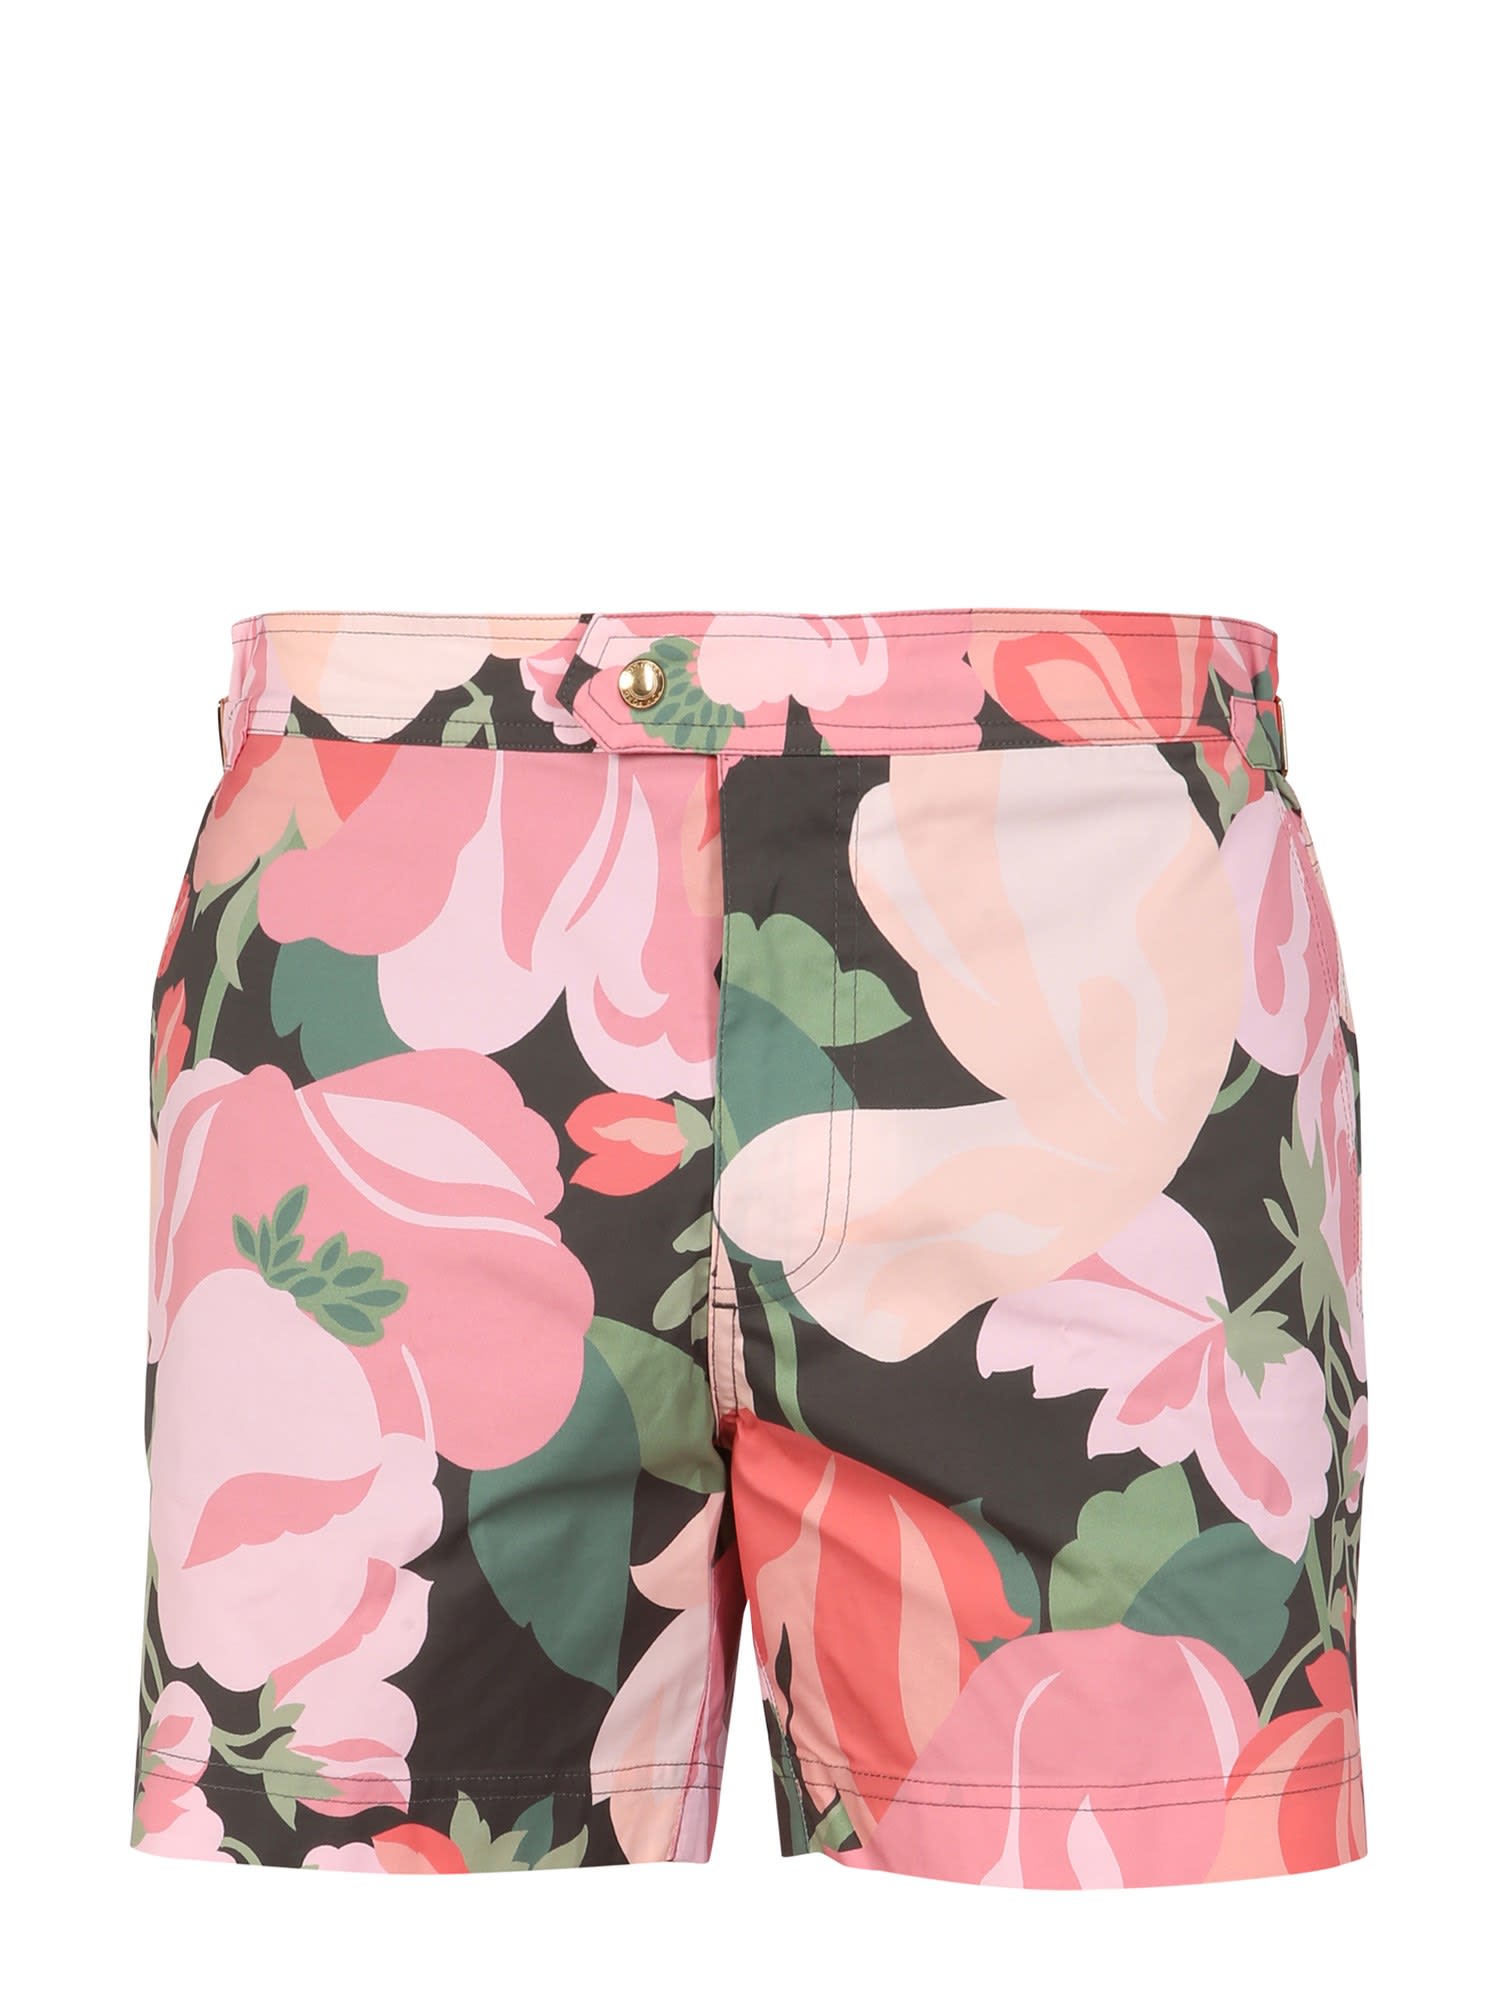 TOM FORD FLORAL PATTERN SWIMSUIT